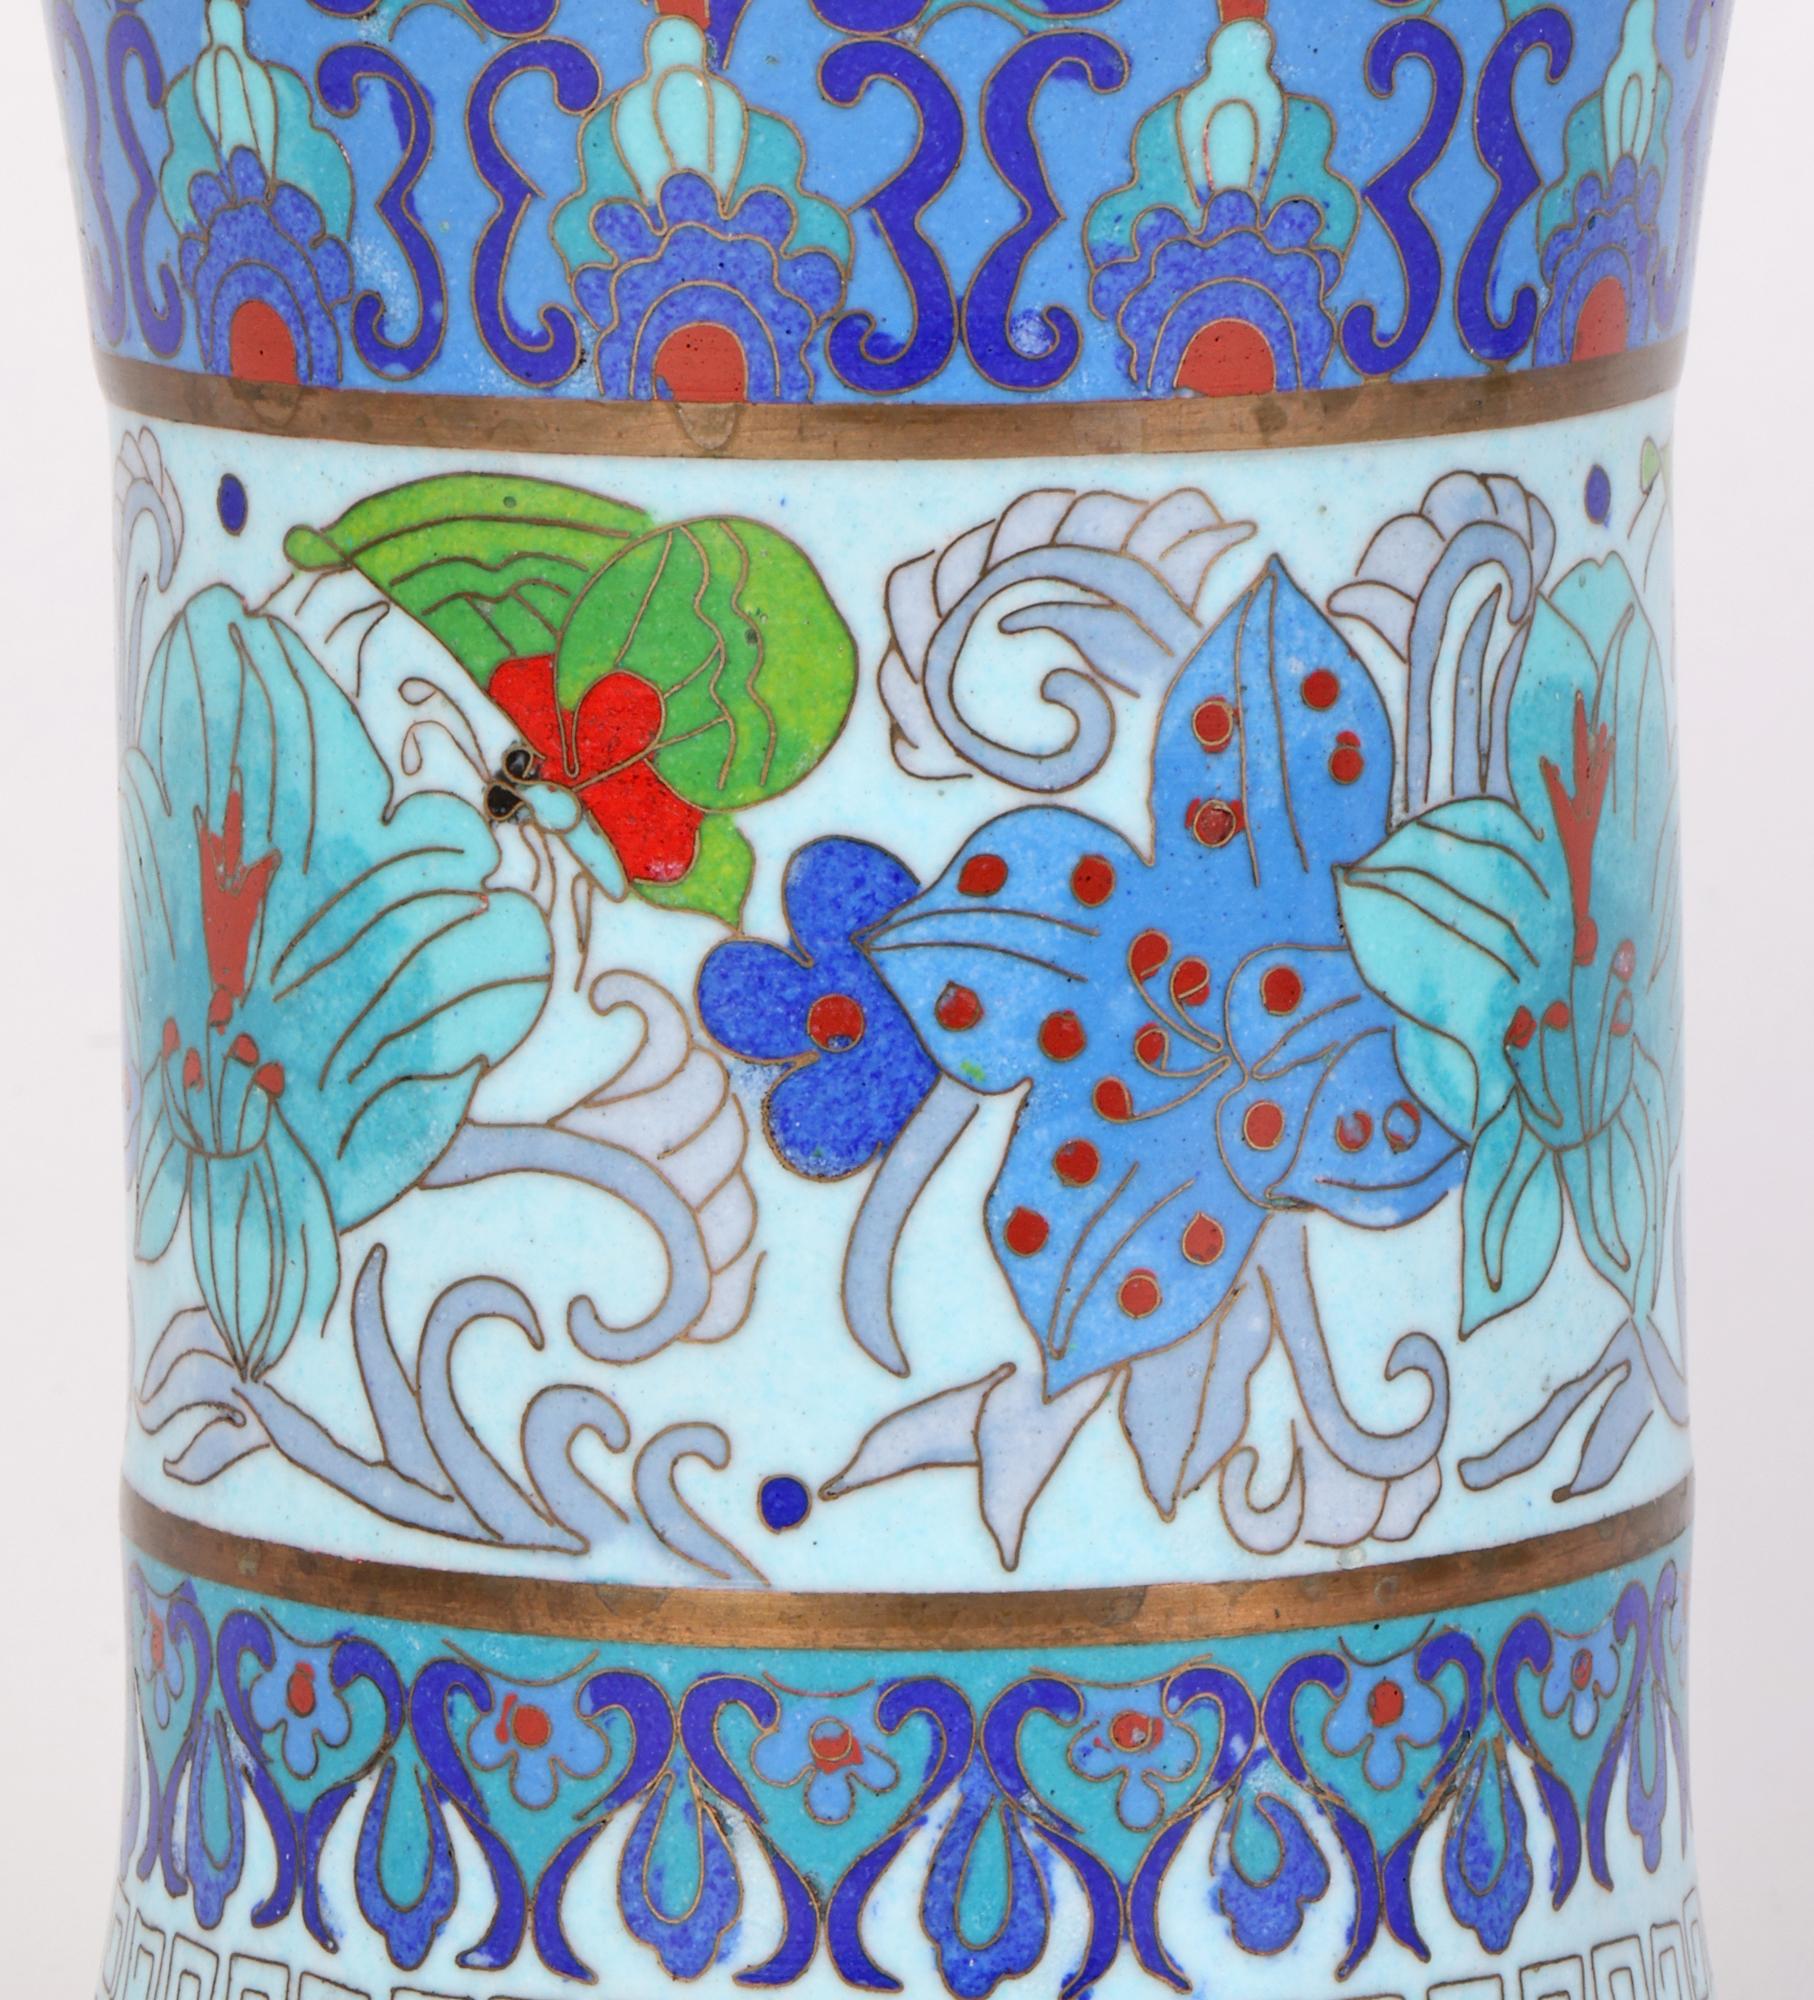 A stylish trumpet shaped waisted cloisonne vase decorated with stylized floral patterning and dating from the early to mid-20th century. The vase made from brass metal stands on a wide round base slightly recessed and finished in typical turquoise